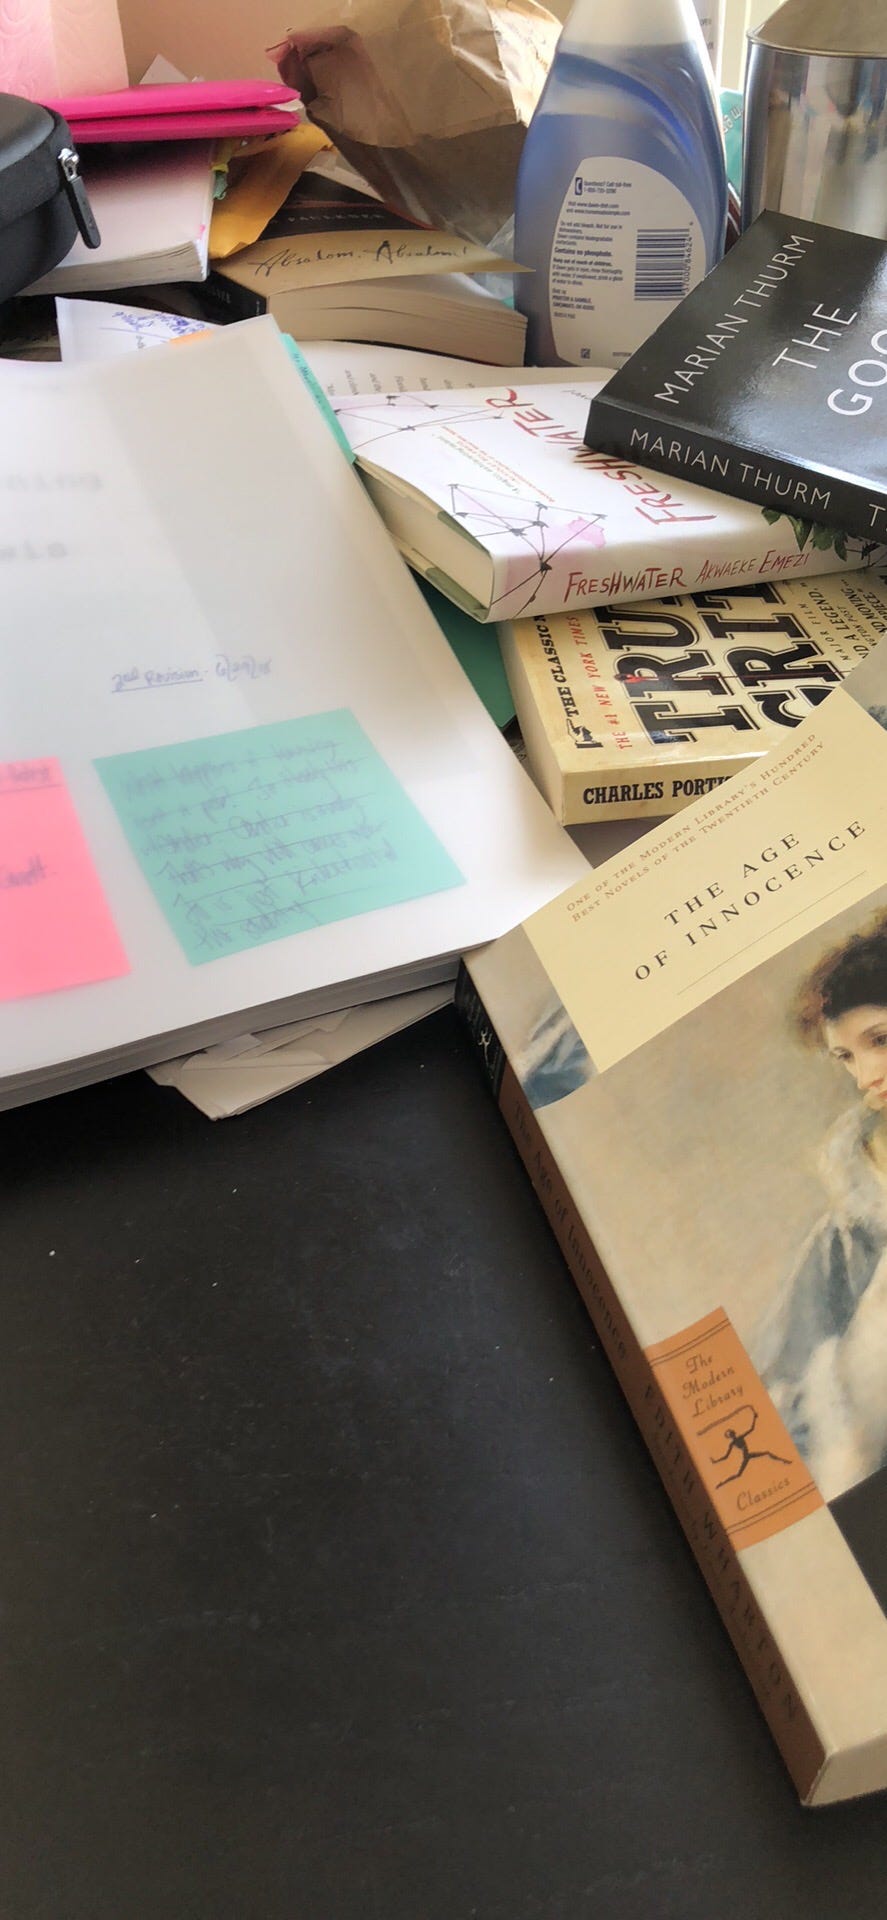 A photo of Kat’s messy writing desk. A print-out of her thesis novel is sitting next to True Grit by Charles Portis, The Age of Innocence by Edith Wharton, Freshwater by Akwaeke Emezi, and The Good Life by Marian Thurm.